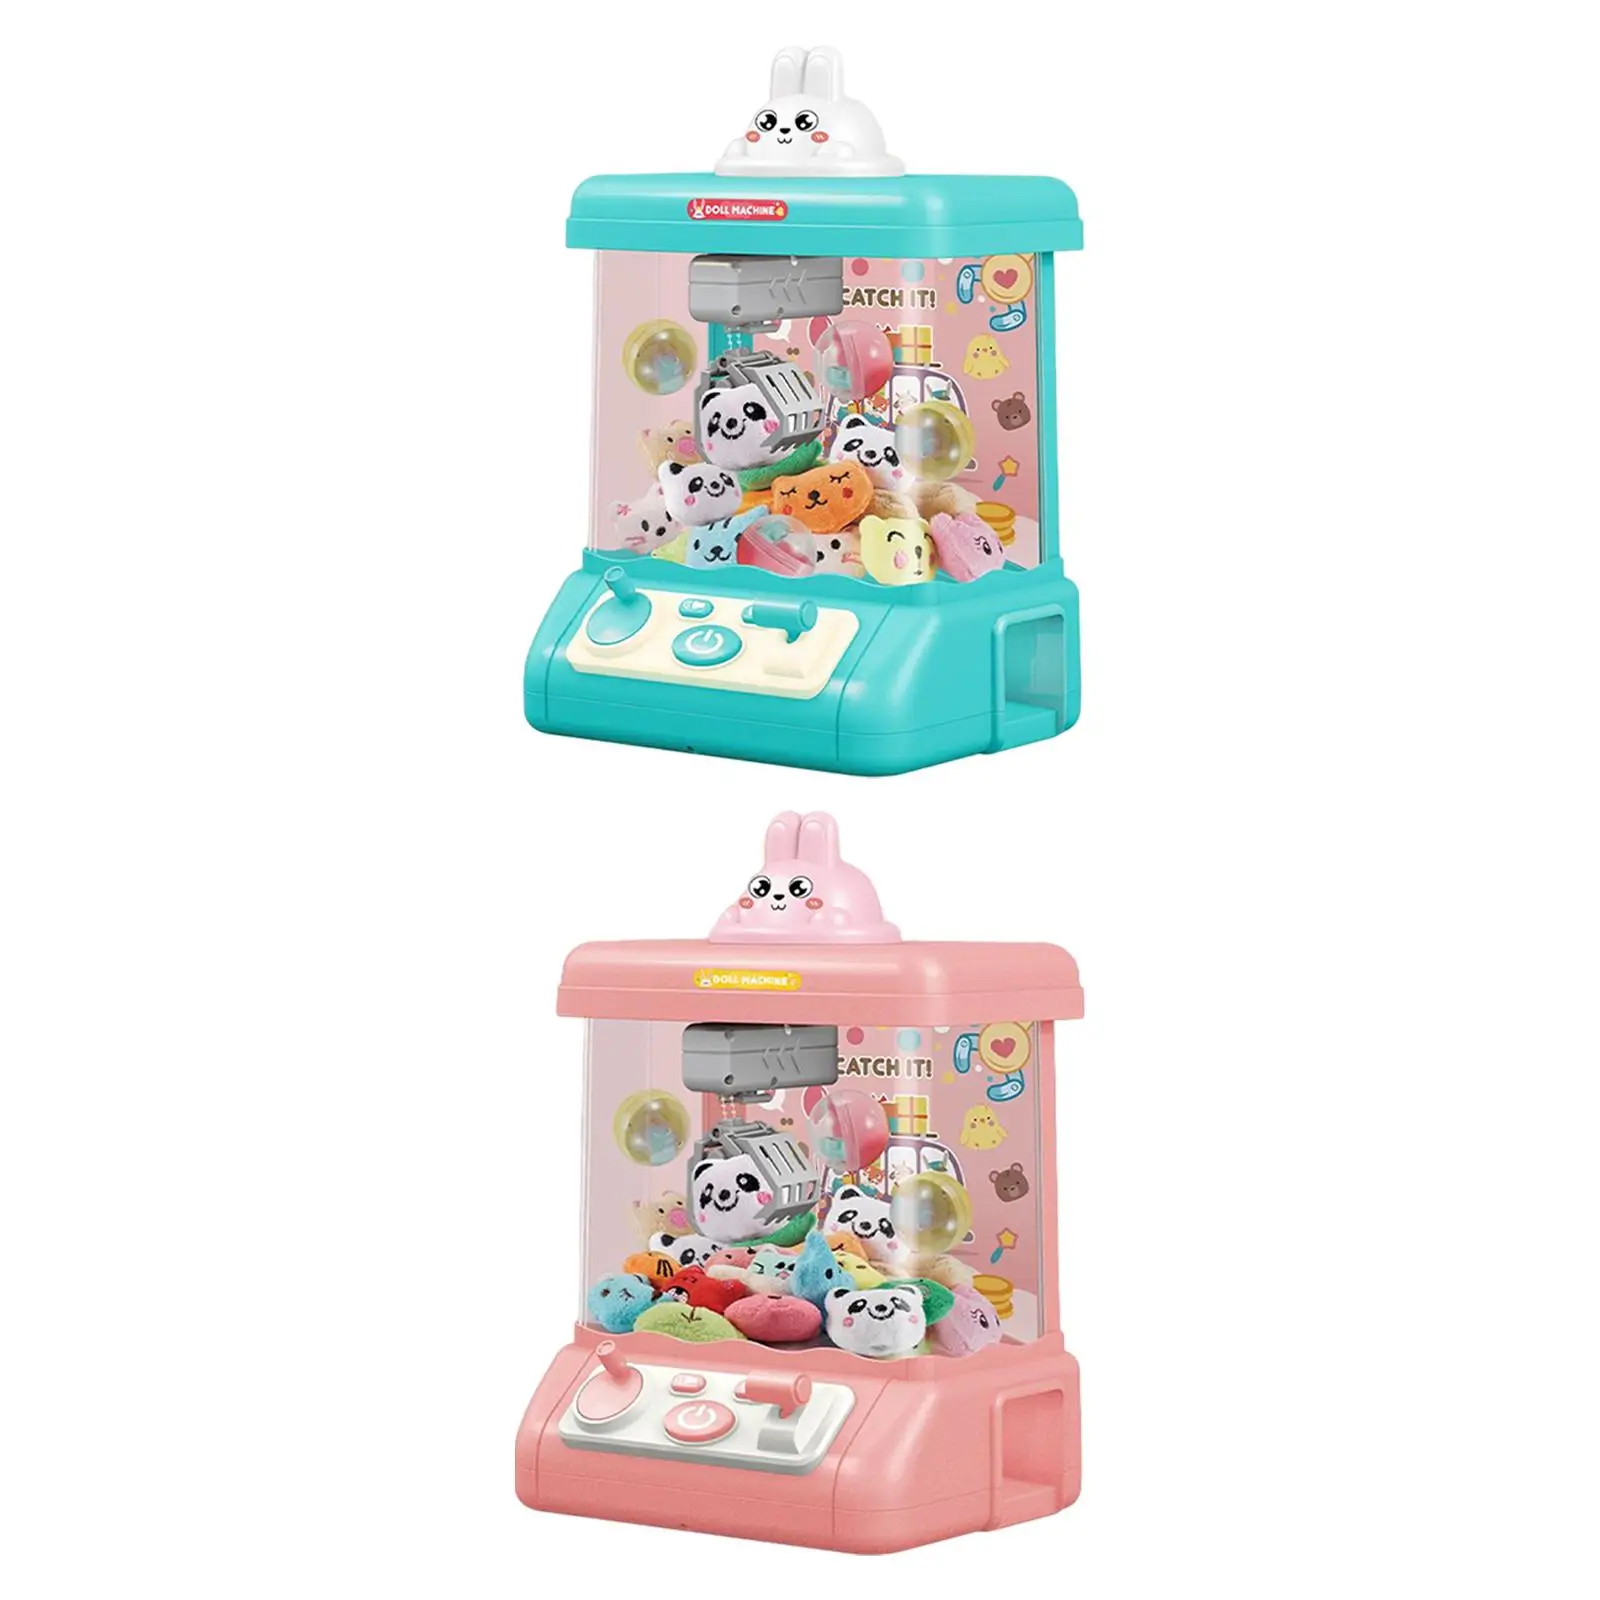 Kids Claw Machine Gifts Electronic Arcade Game Catching Doll Machine